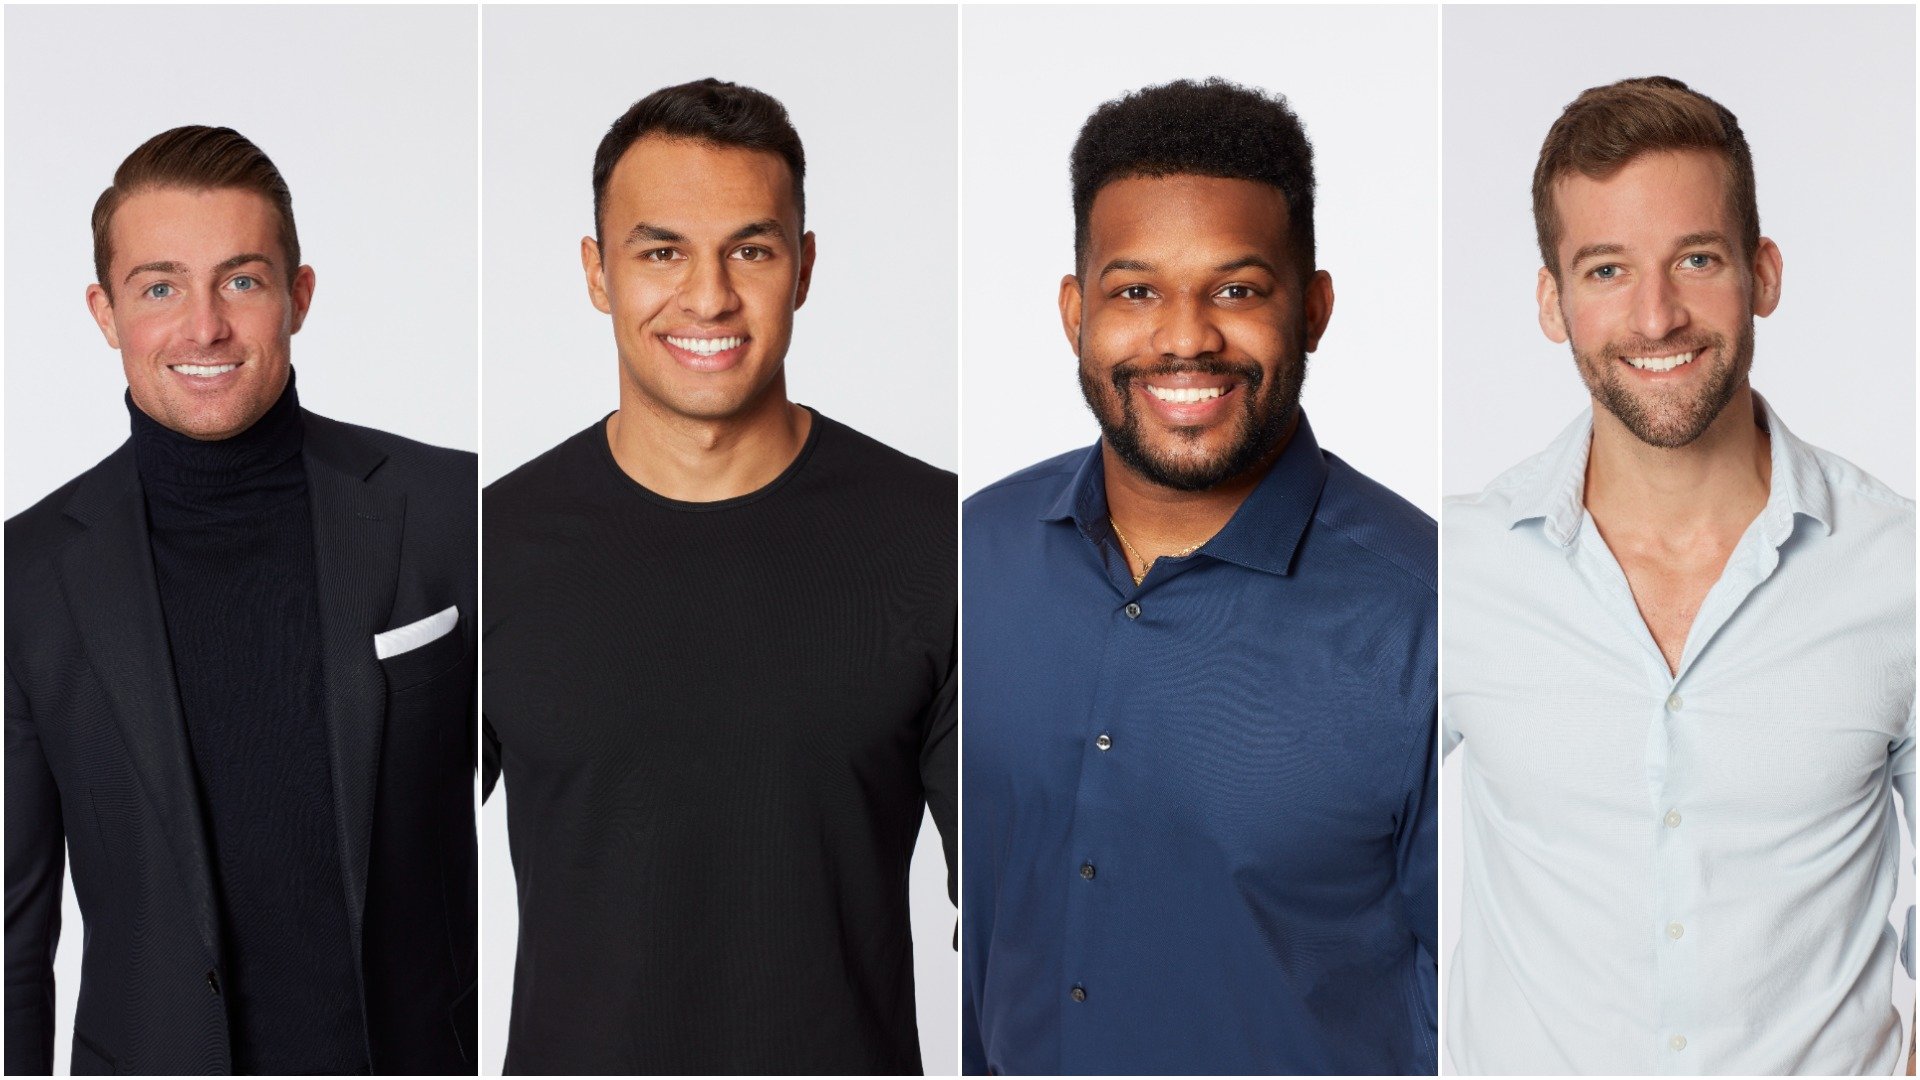 Headshots of James Bonsall, Aaron Clancy, Tre Cooper, and Connor Brennan from ‘The Bachelorette’ and ‘Bachelor in Paradise’ in 2021